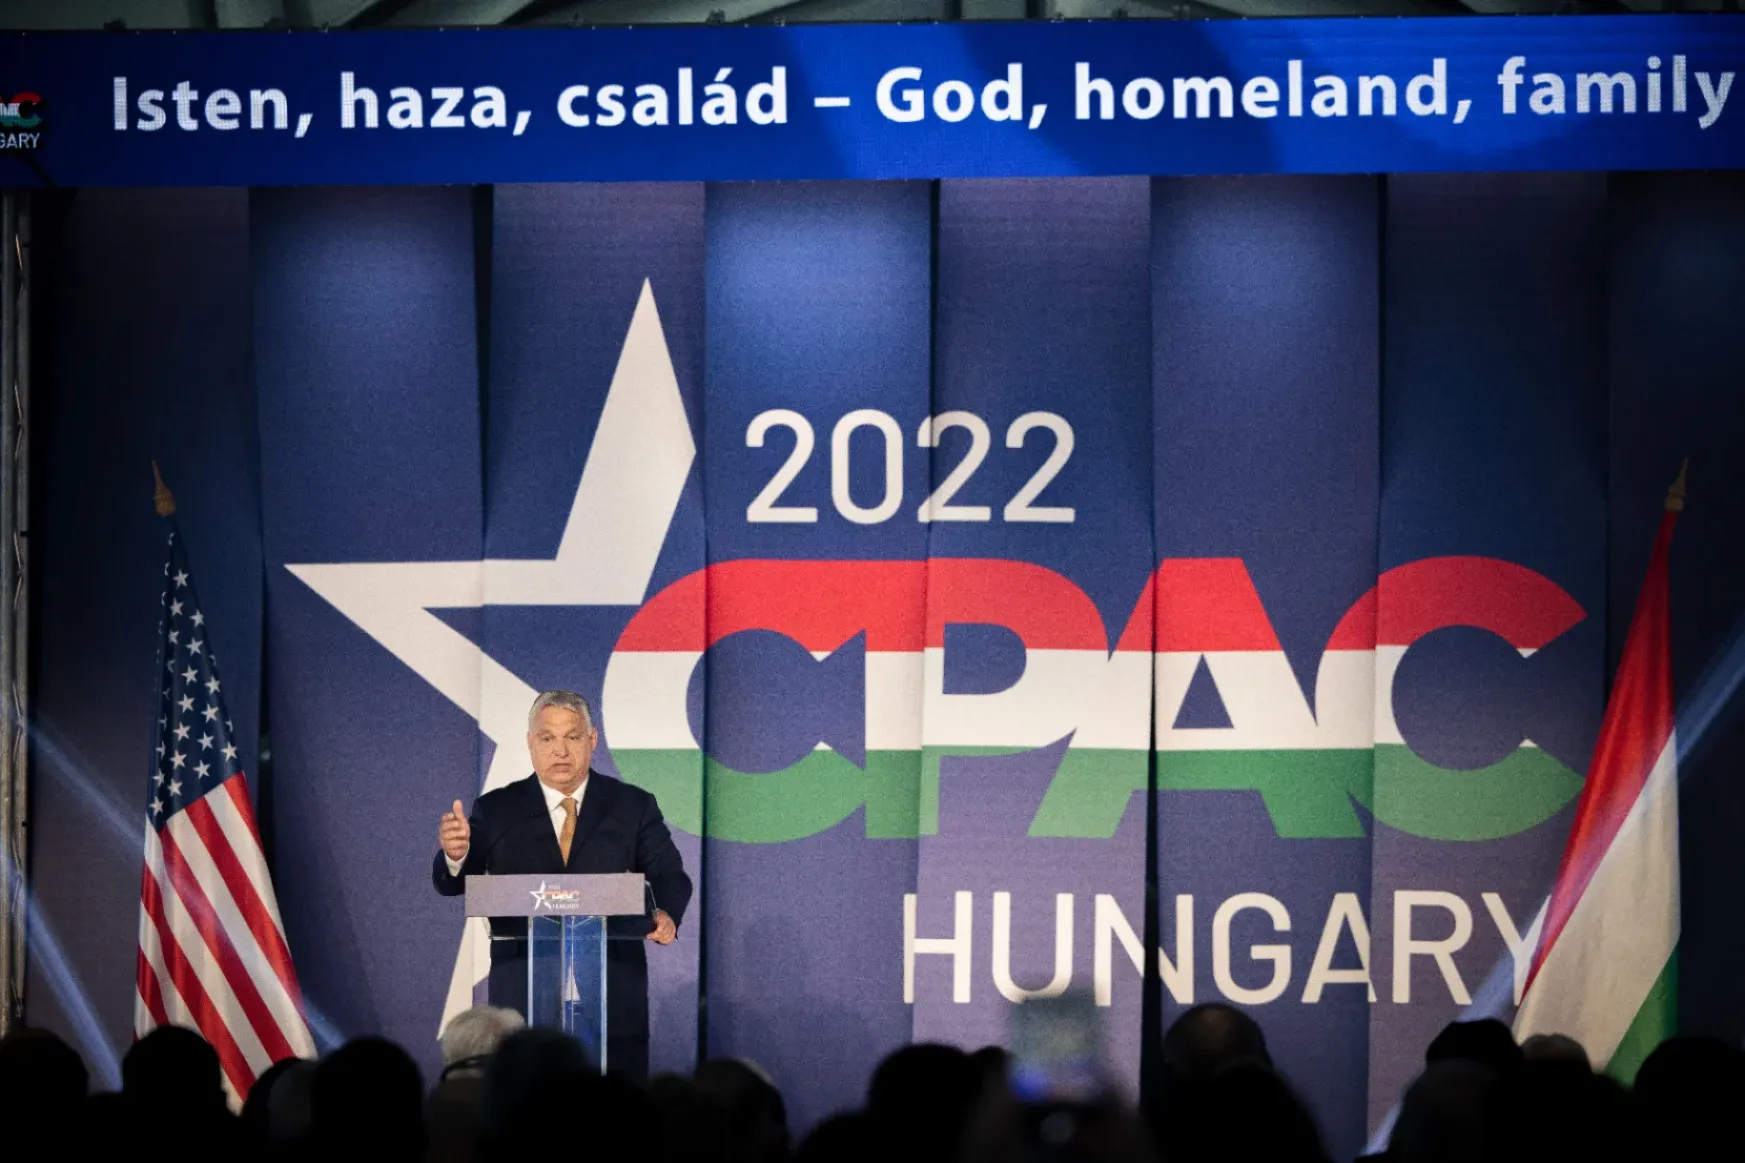 CPAC Hungary begins with Orbán sharing his recipe for success